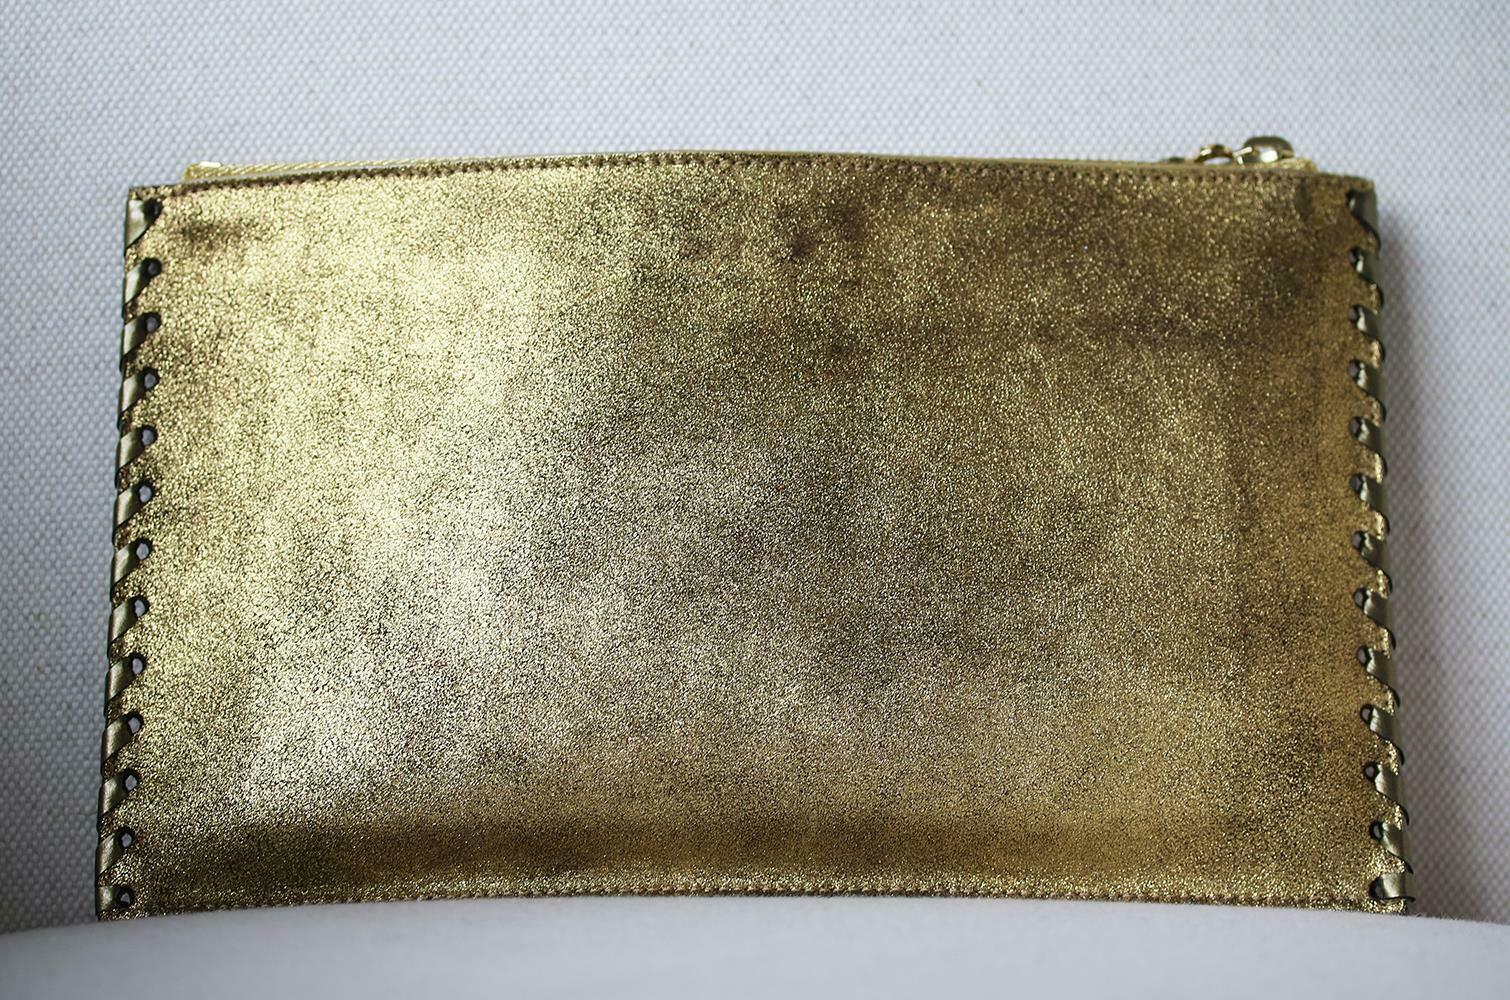 Balmain master of all things fabulously glamorous never fails to deliver. This crystal embellished soft suede pouch with top zipper fastening is the perfect summer accessory. Crafted from burnished gold soft suede and finished with a top layer of